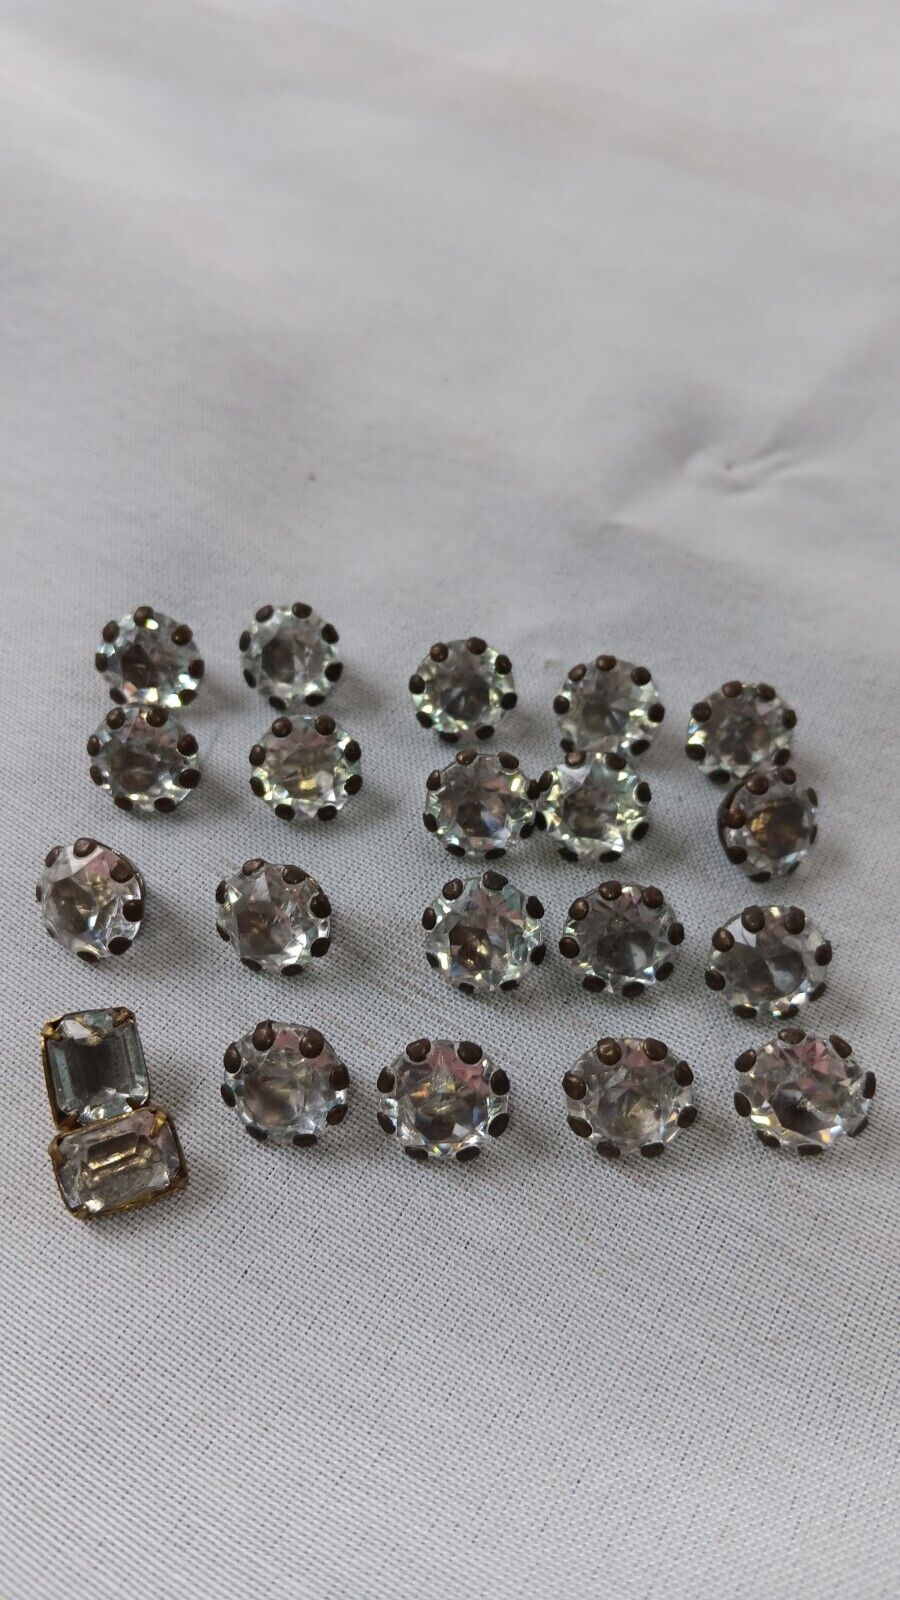 Vintage Rhinestone Buttons Lot of 21